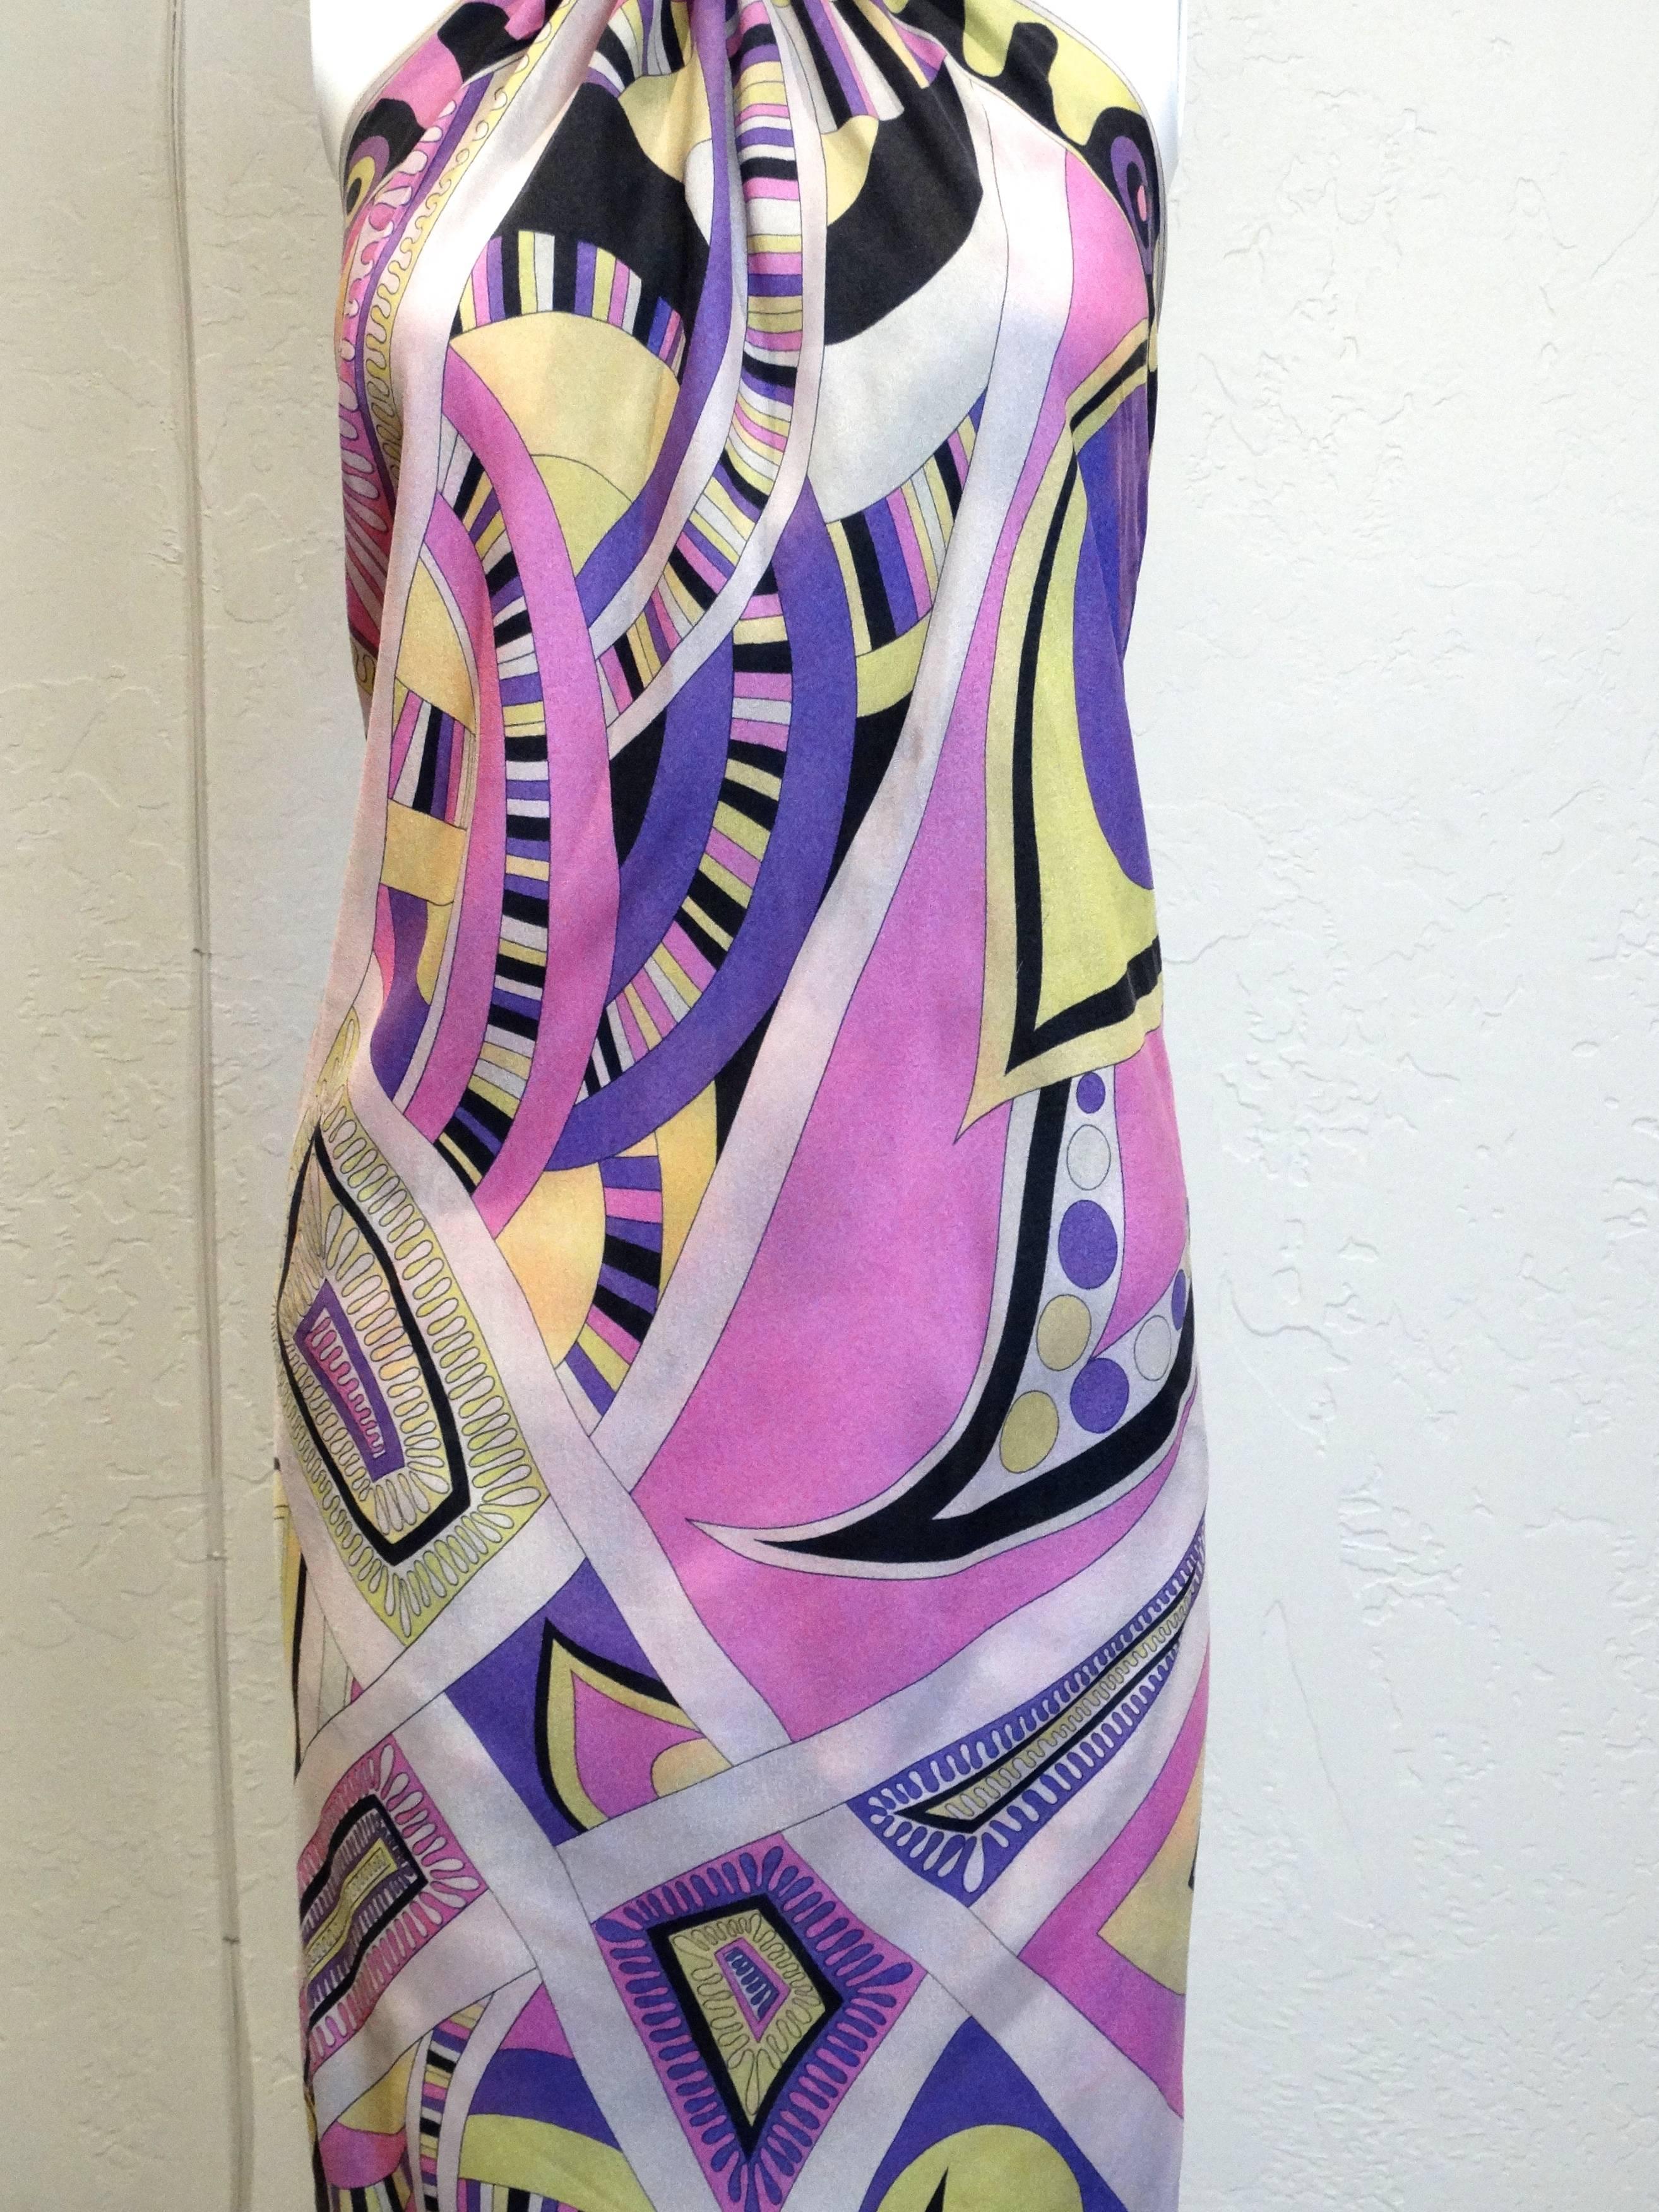 This gorgeous 60's scarf dress made from a large Emilio Pucci silk scarf has one seam for the neck ribbon and one seam at the back to hold the scarf together. (The seam can be easily adjusted for a better fit.) Light as a feather and a perfect